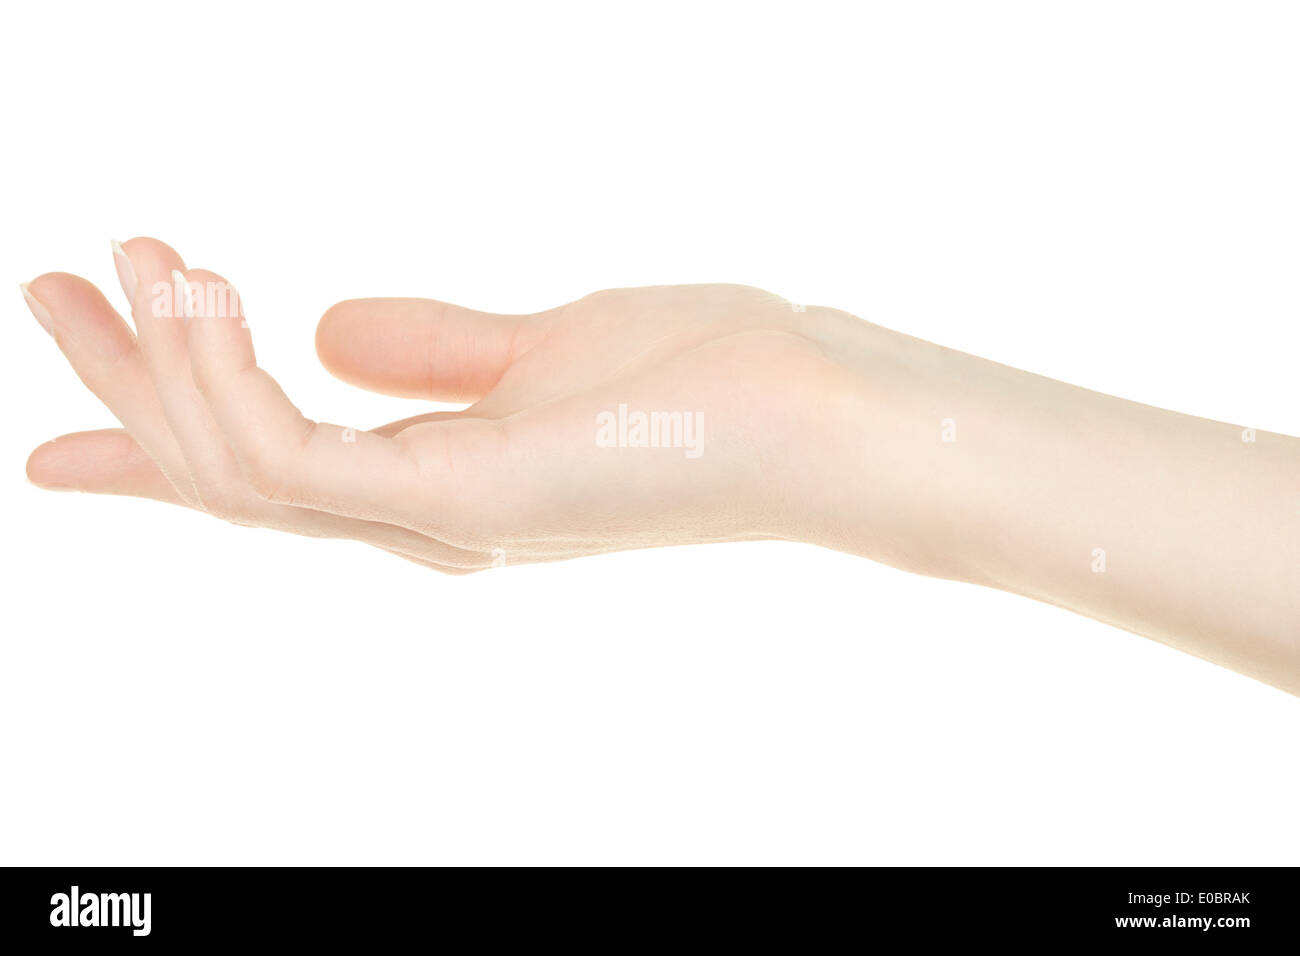 Female hand open, palm up Stock Photo